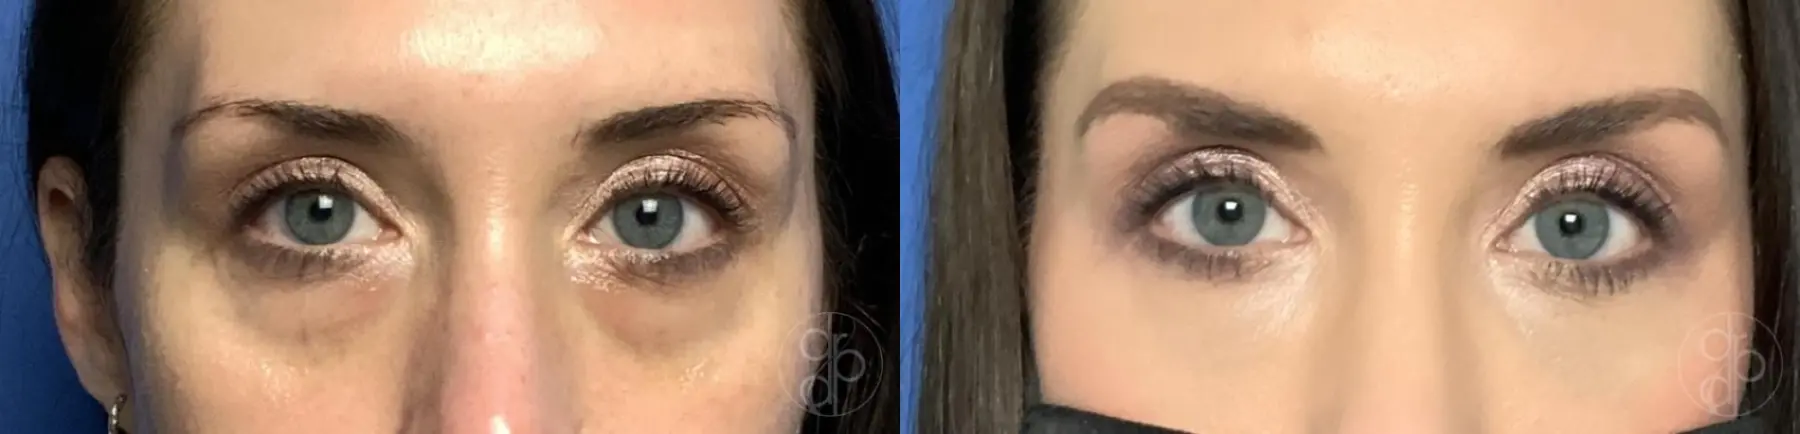 patient 12747 fillers before and after result - Before and After